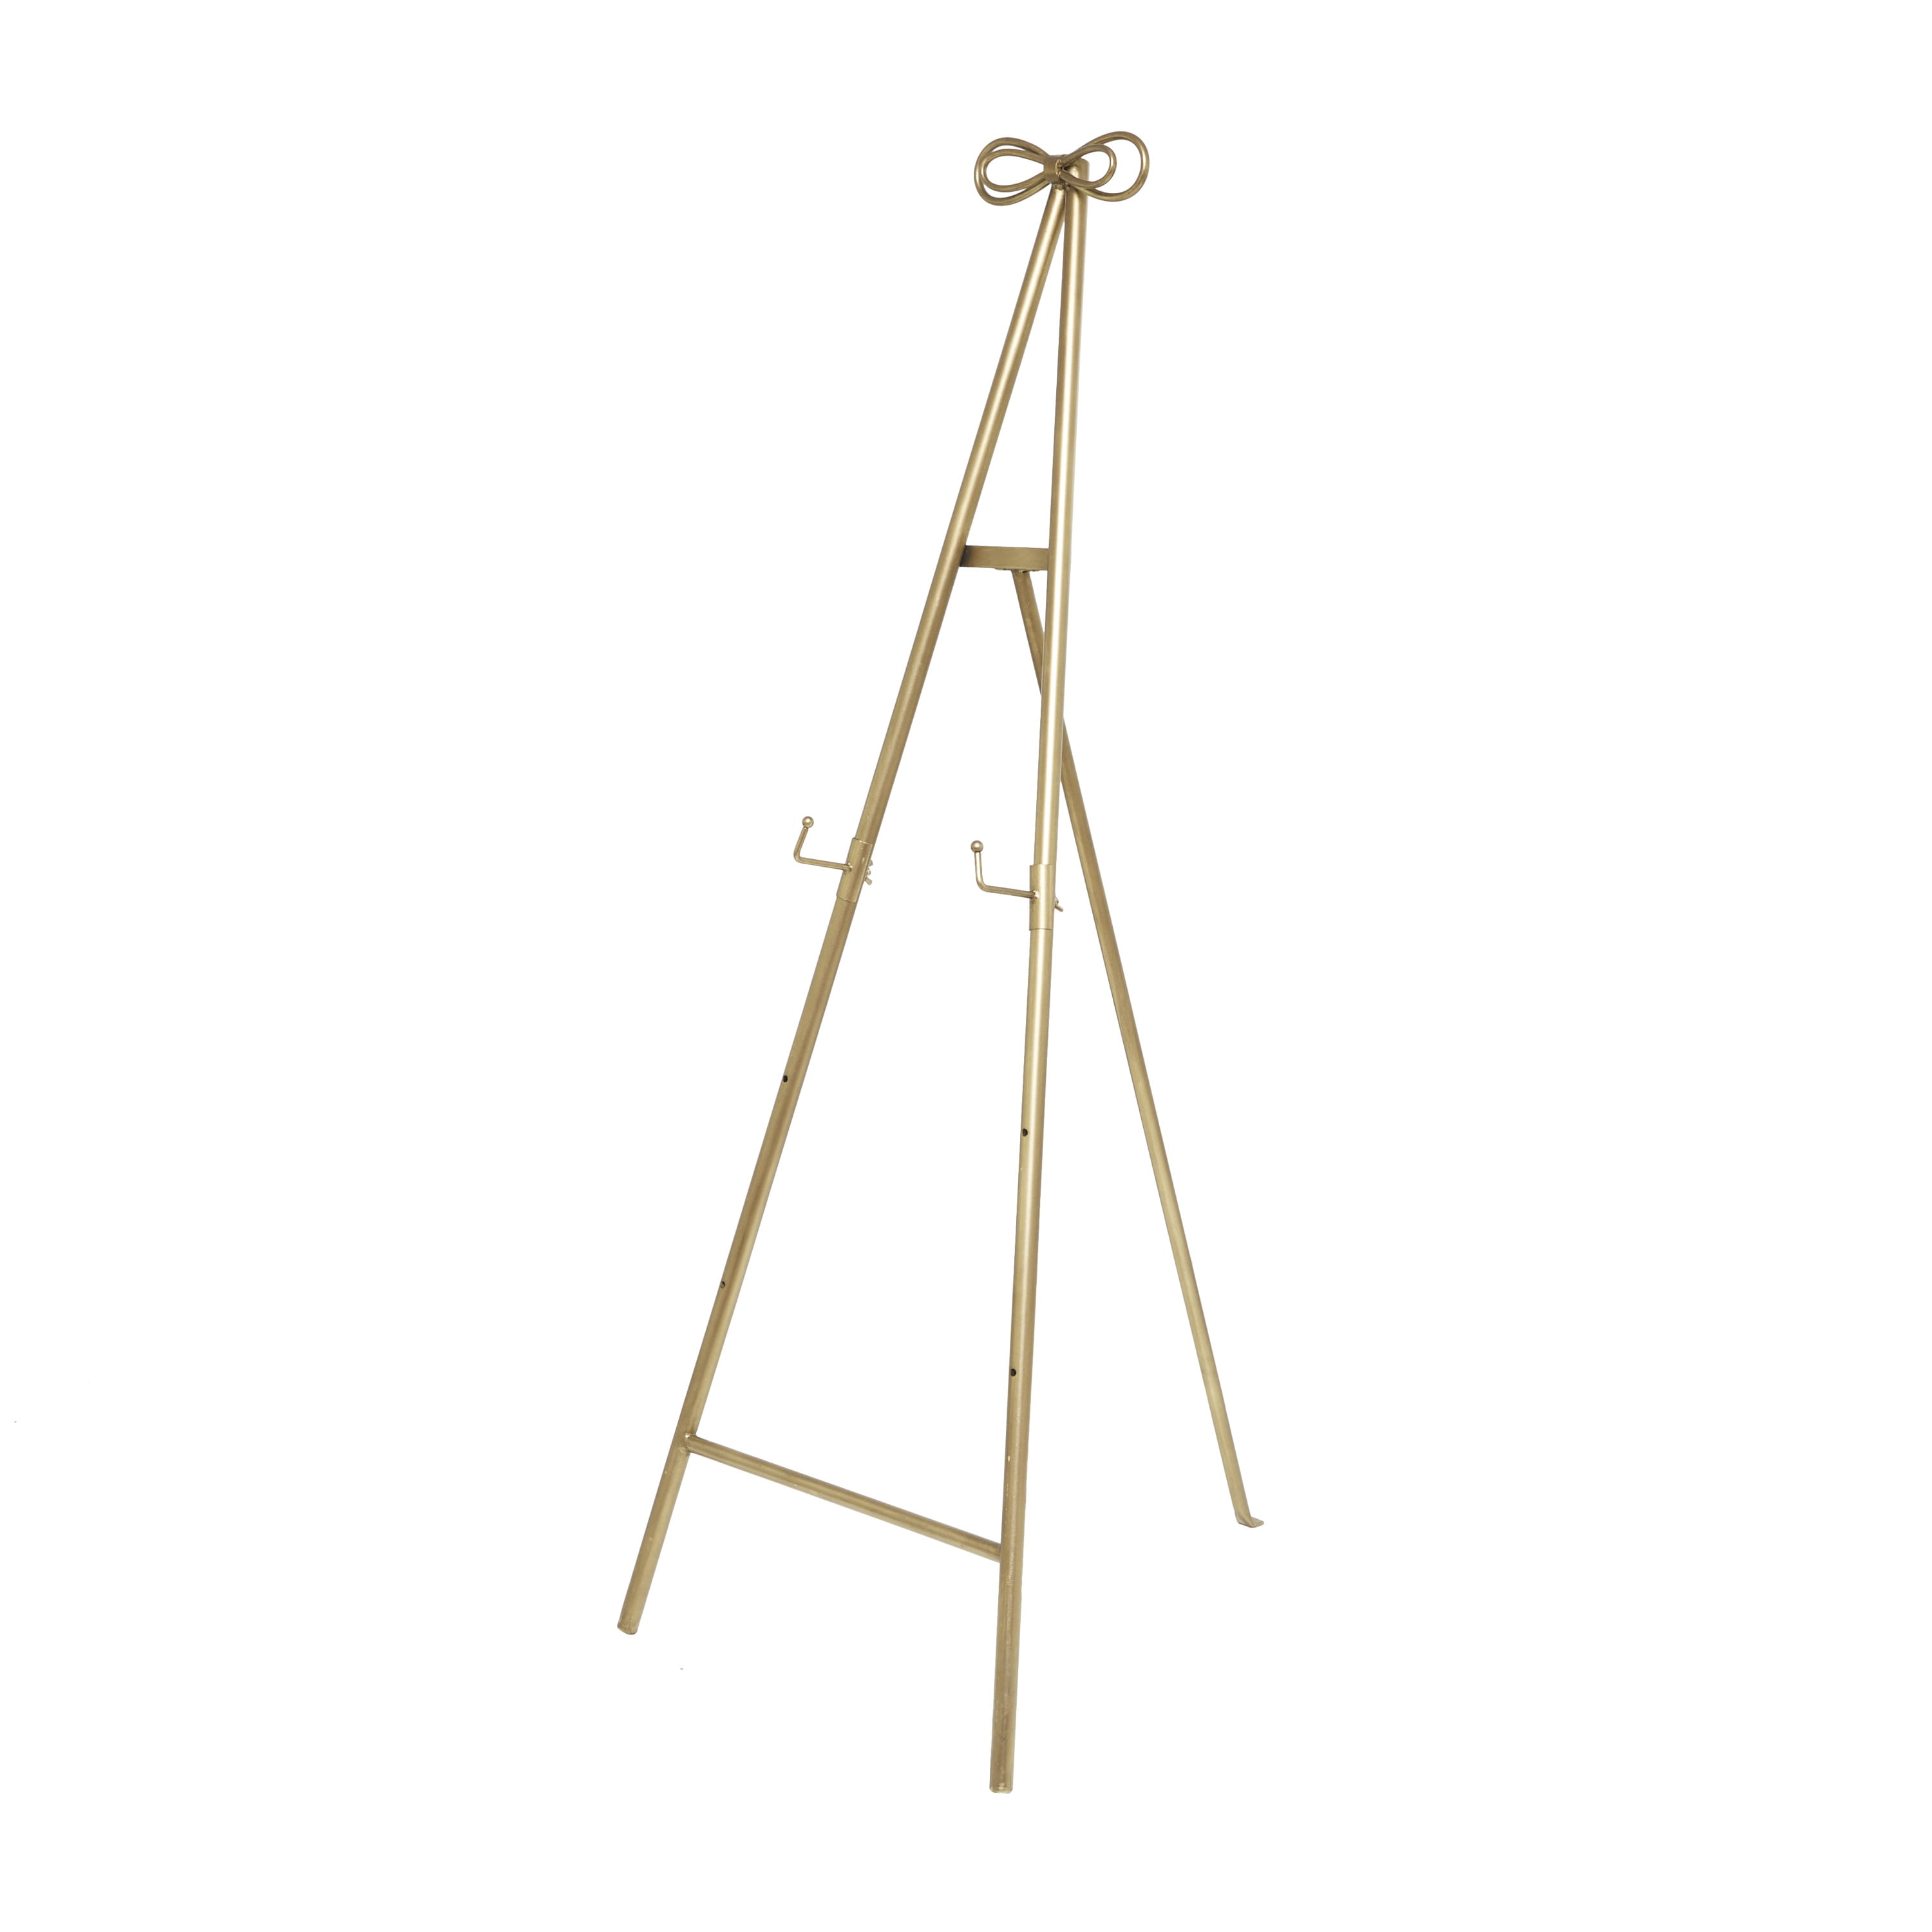 Decmode 20 inch x 53 inch Gold Metal Tall Adjustable Display Stand 3 Tier Easel with Bow Top, 1-Piece